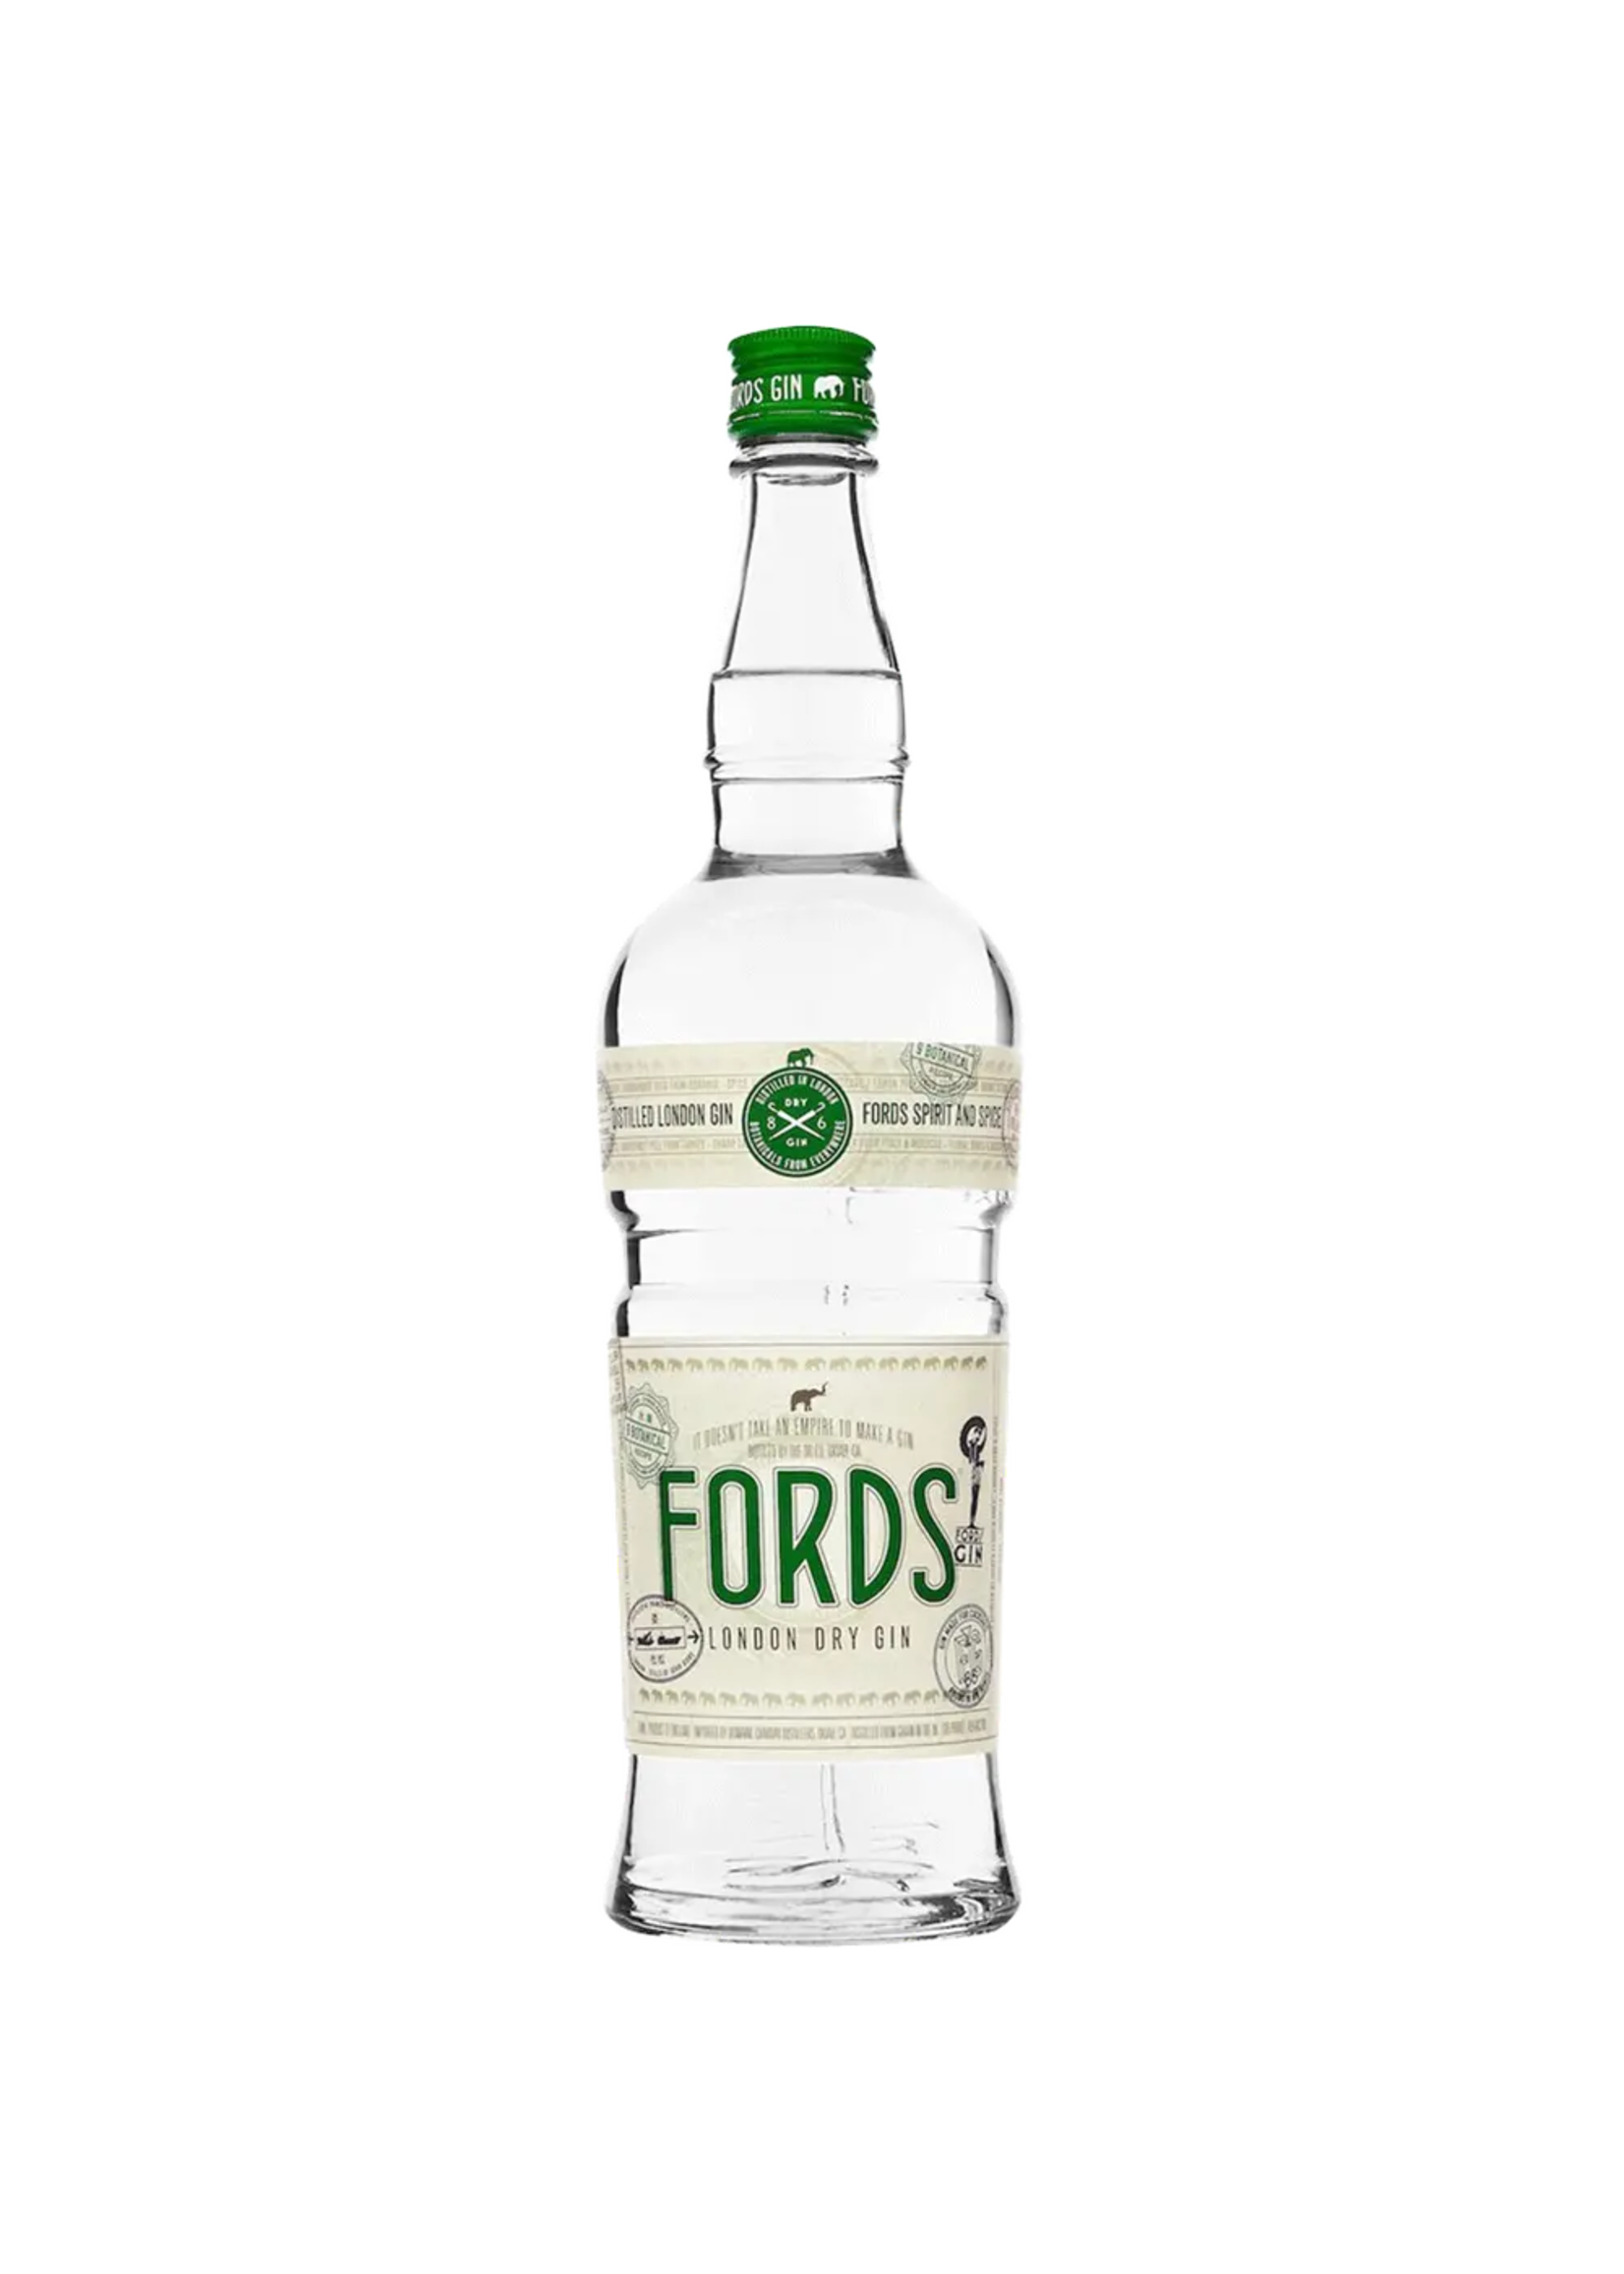 Fords Gin London Dry Gin 90Proof 750ml